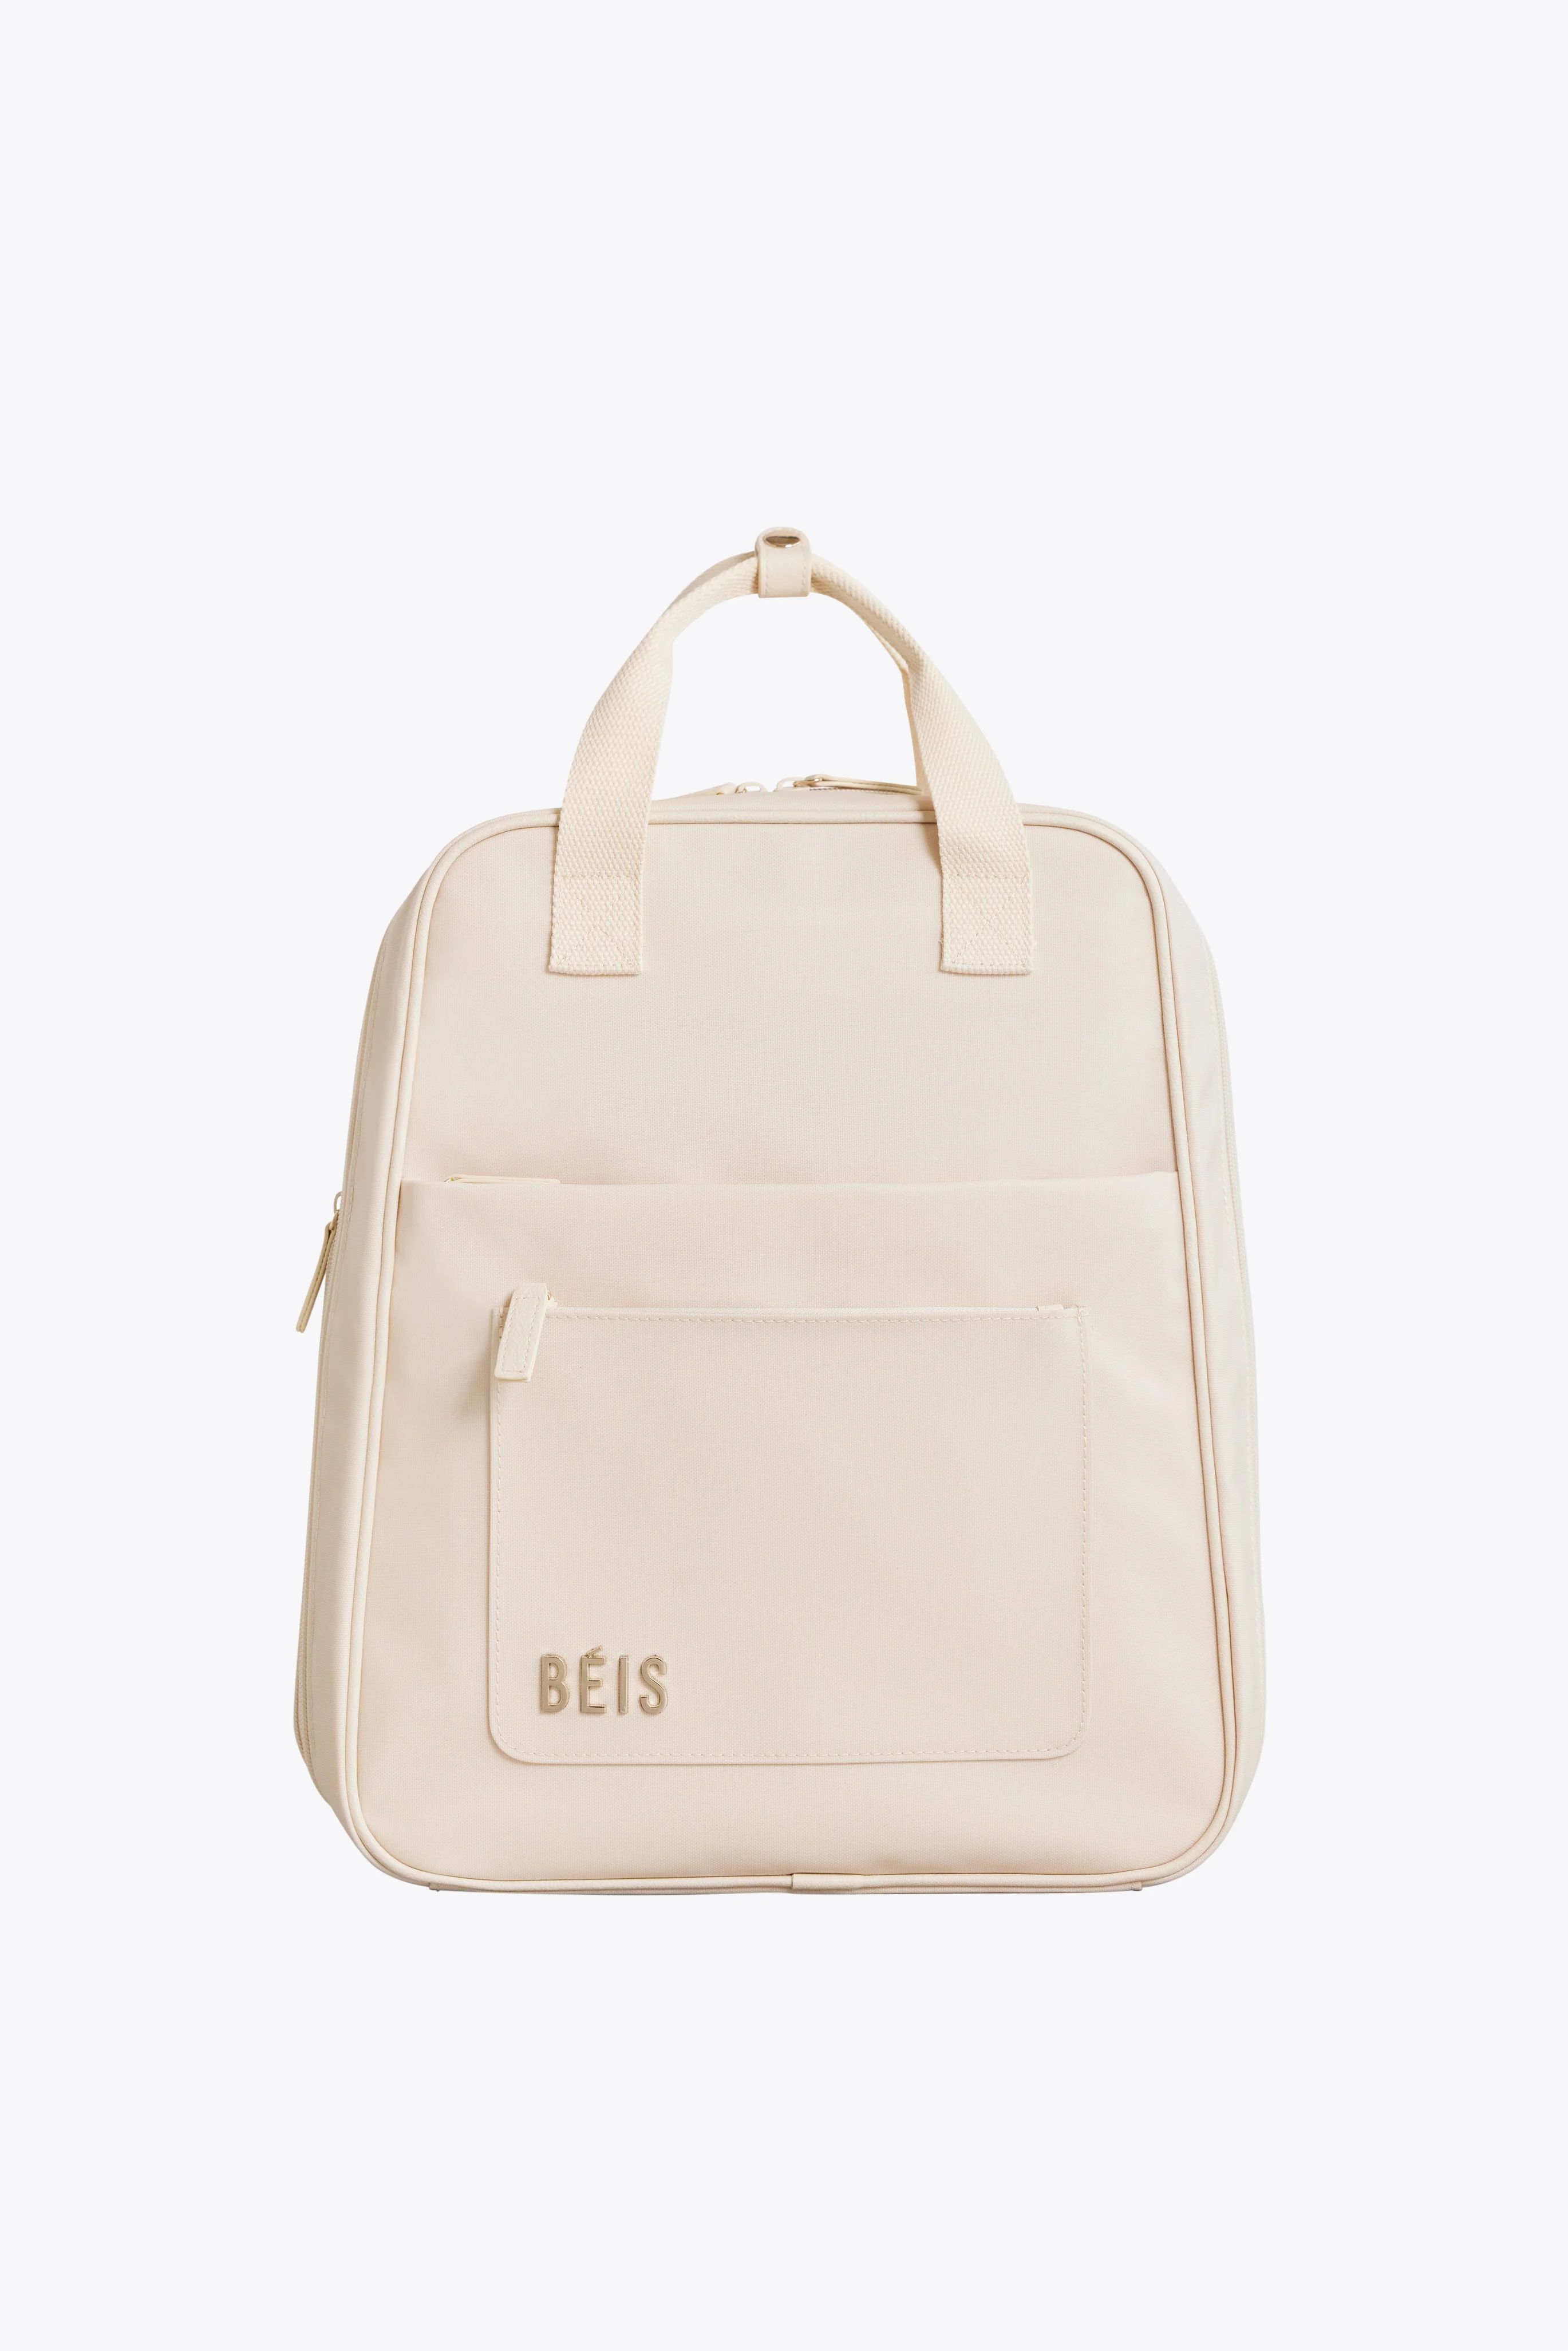 THE EXPANDABLE BACKPACK IN BEIGE | BÉIS Travel